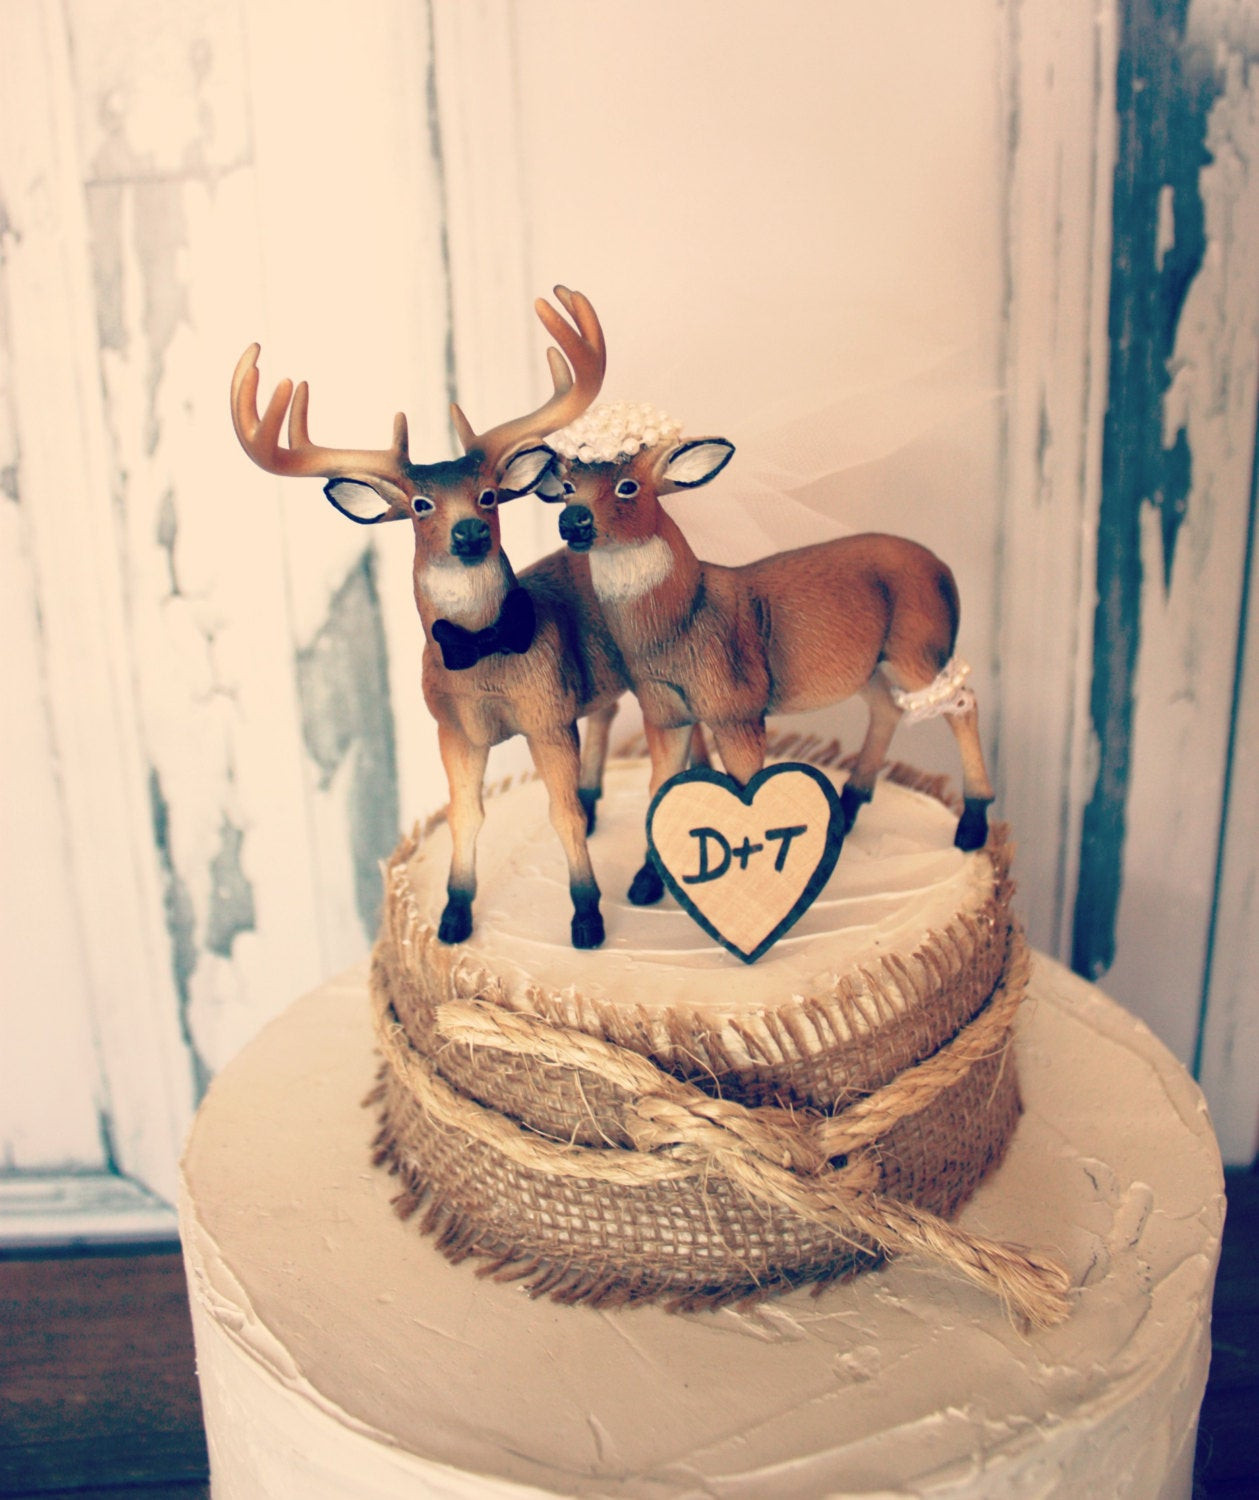 Hunting Wedding Cake Toppers
 Buck and doe wedding cake topper Deer hunting by